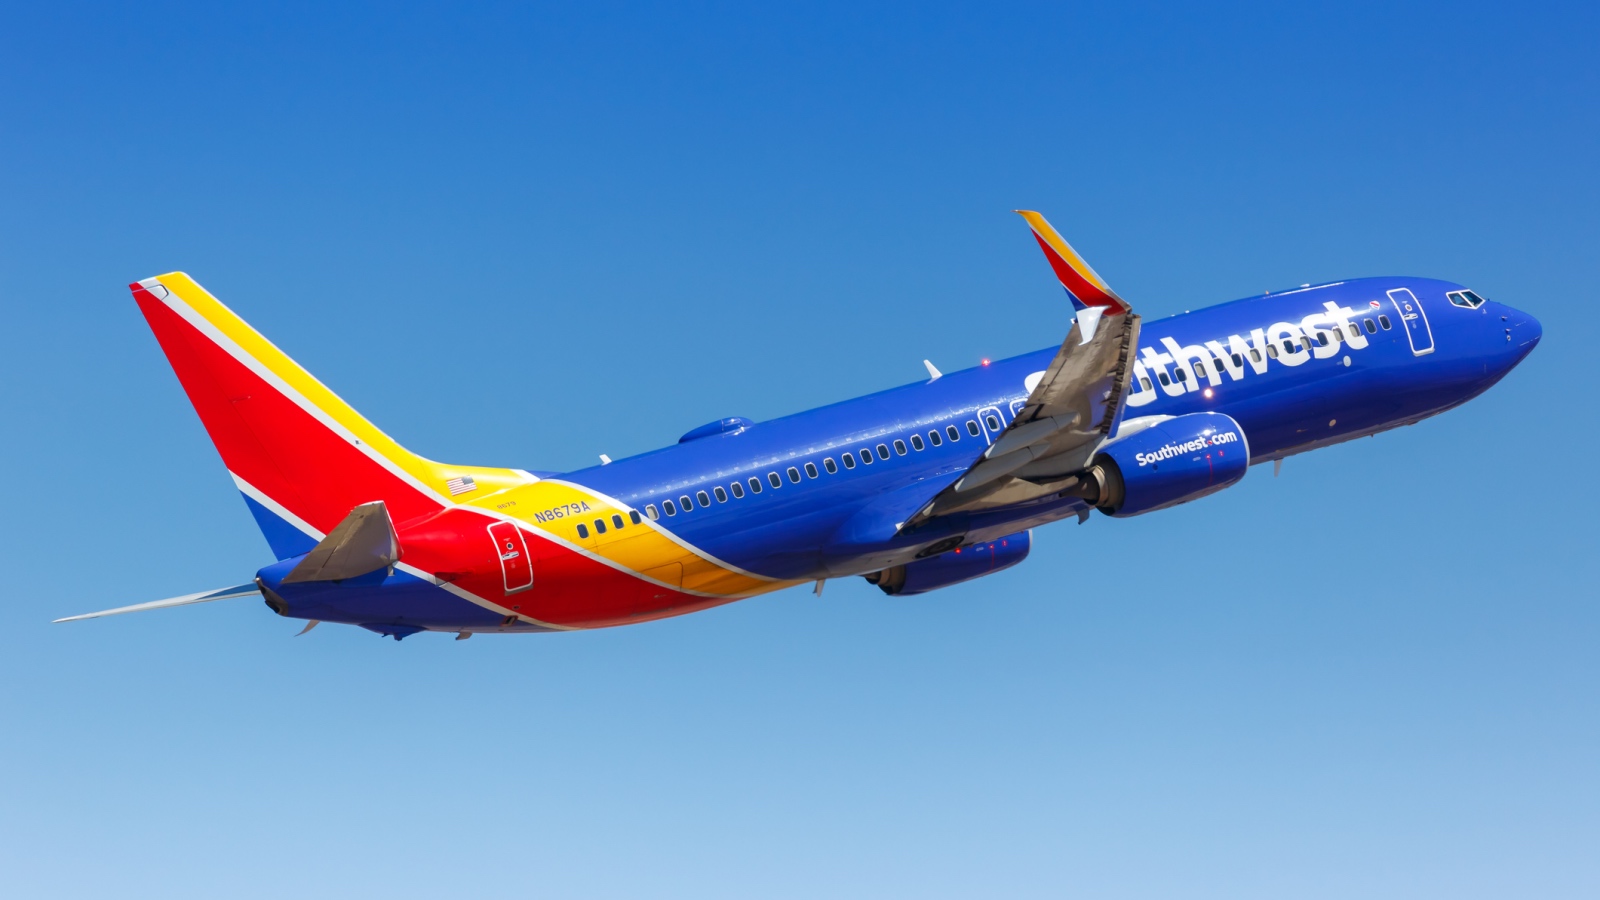 Southwest Airlines plane in flight